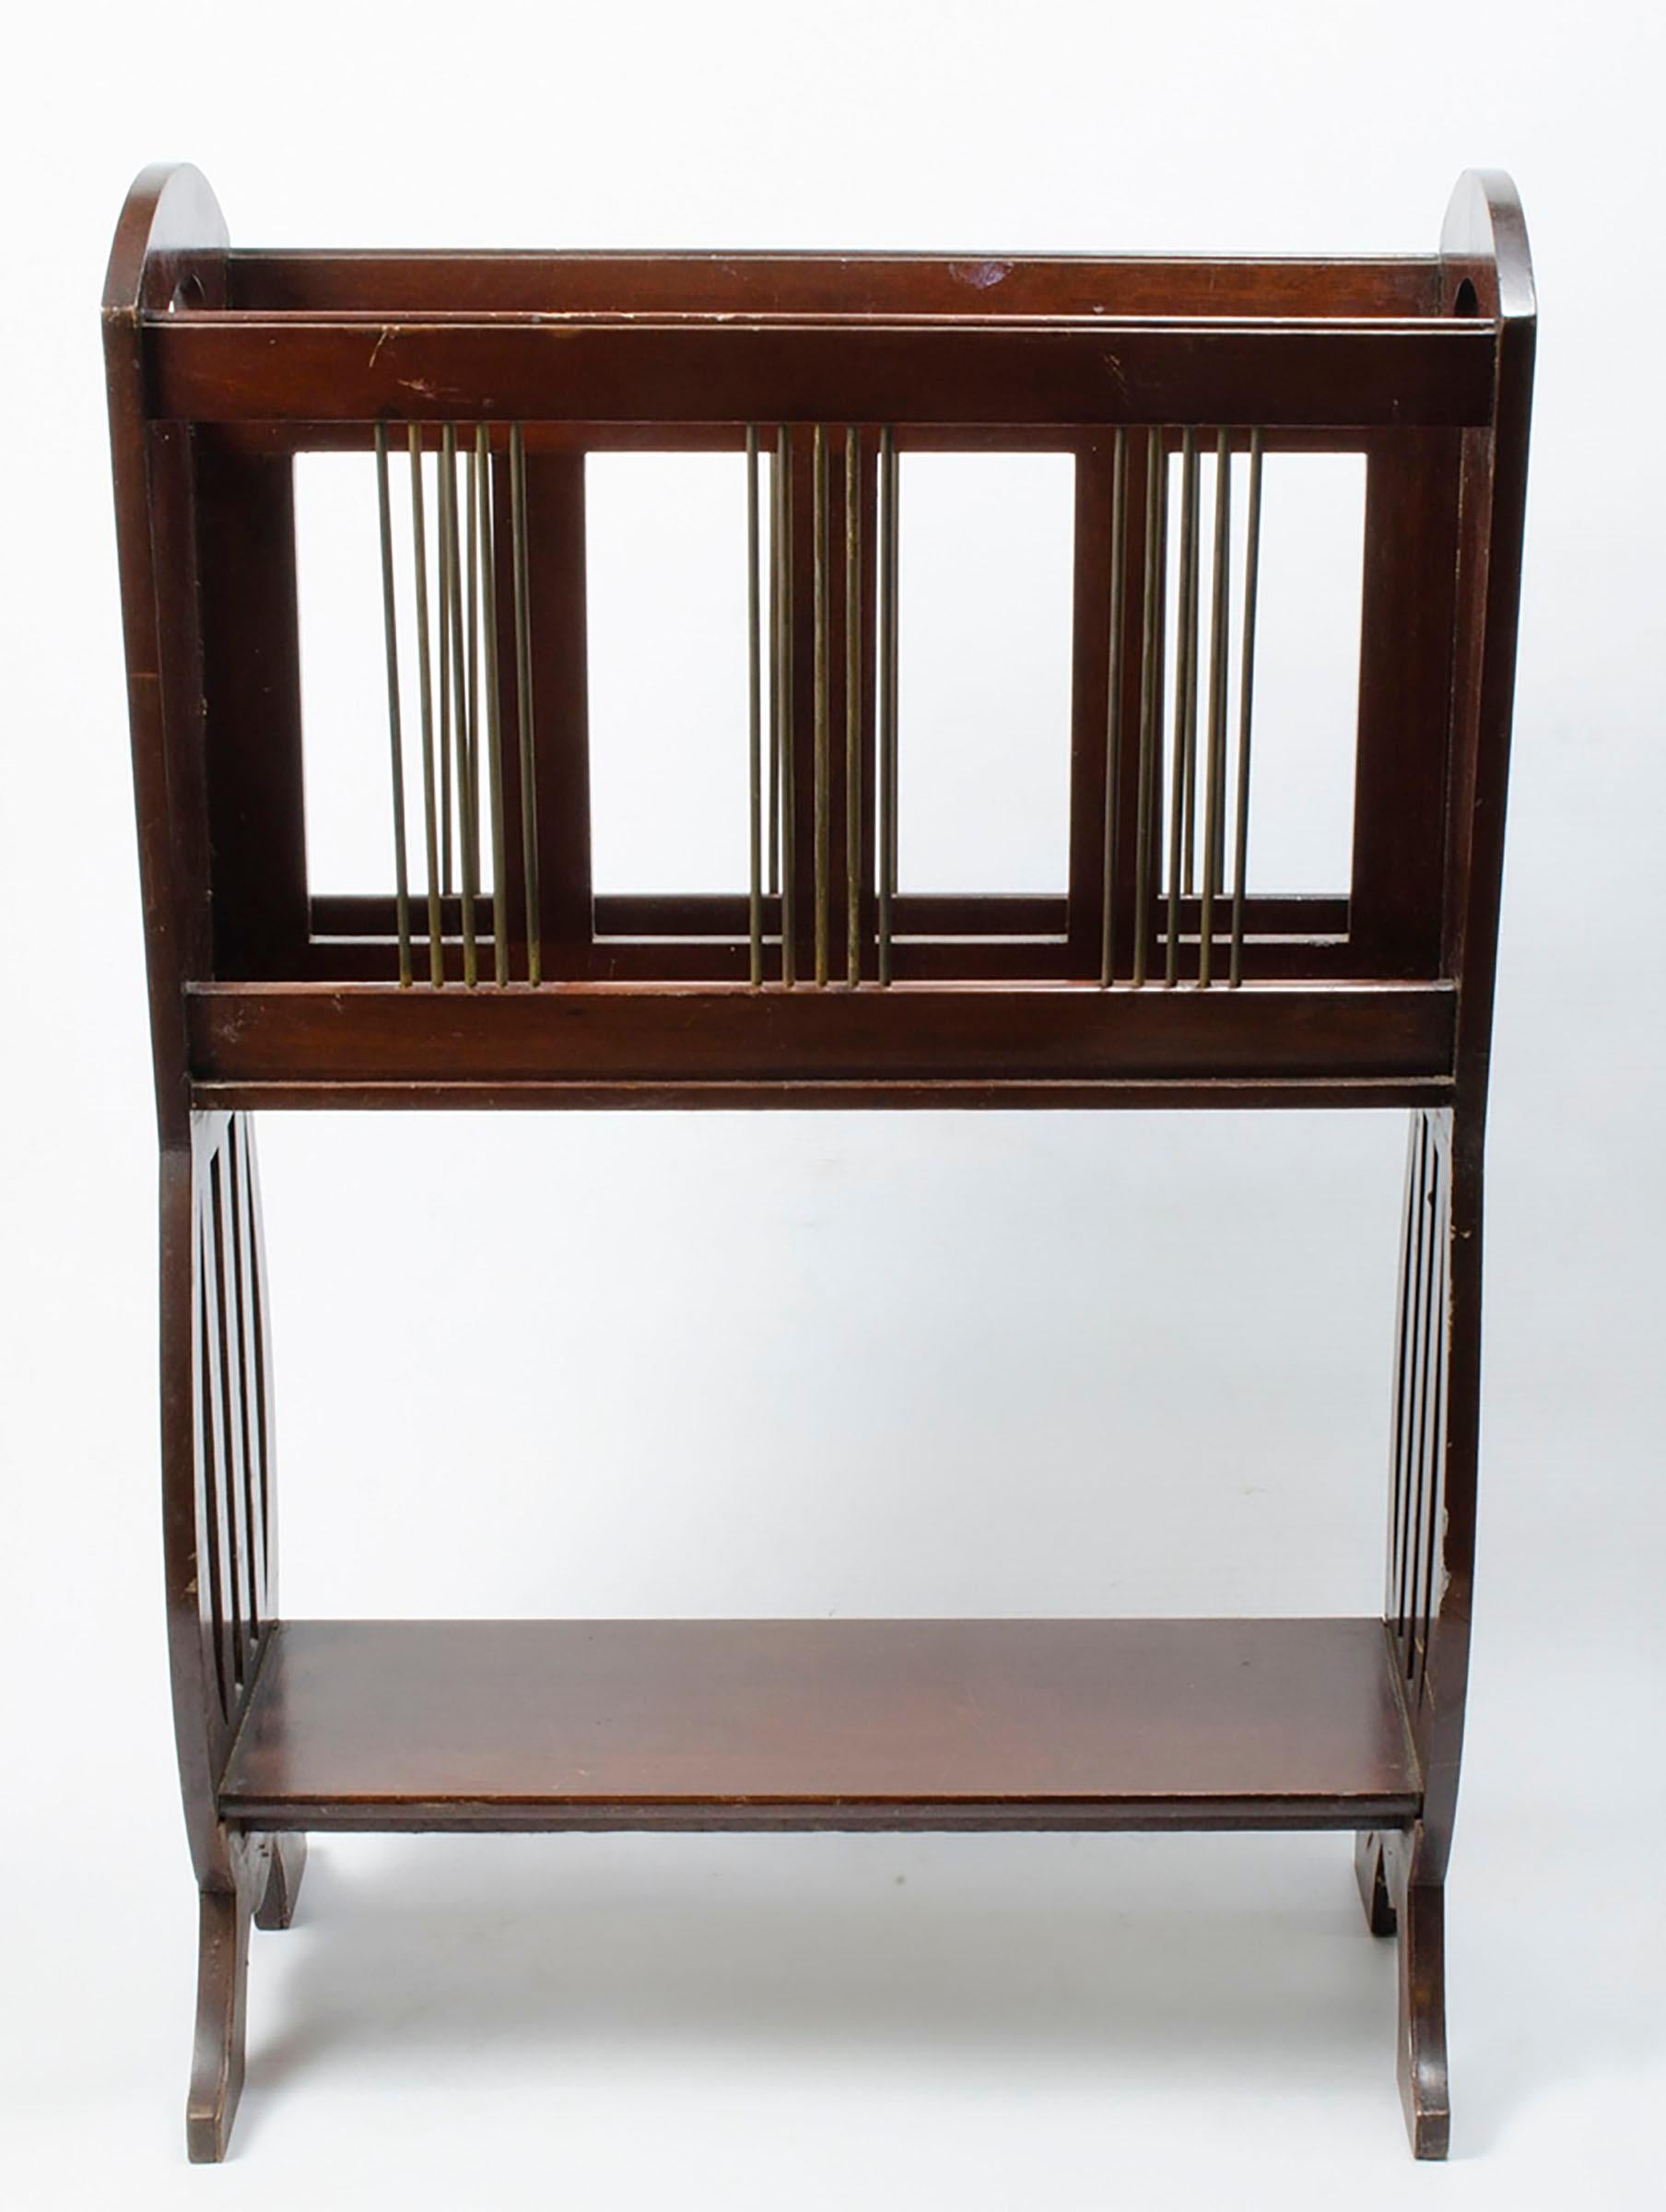 Beautiful Art Nouveau Magazine Rack

This very attractive furniture, Art Nouveau magazine rack in mahogany, having elegant, brass supports and inlaid and slatted side united by undertier, all in original 
condition throughout. C1910
